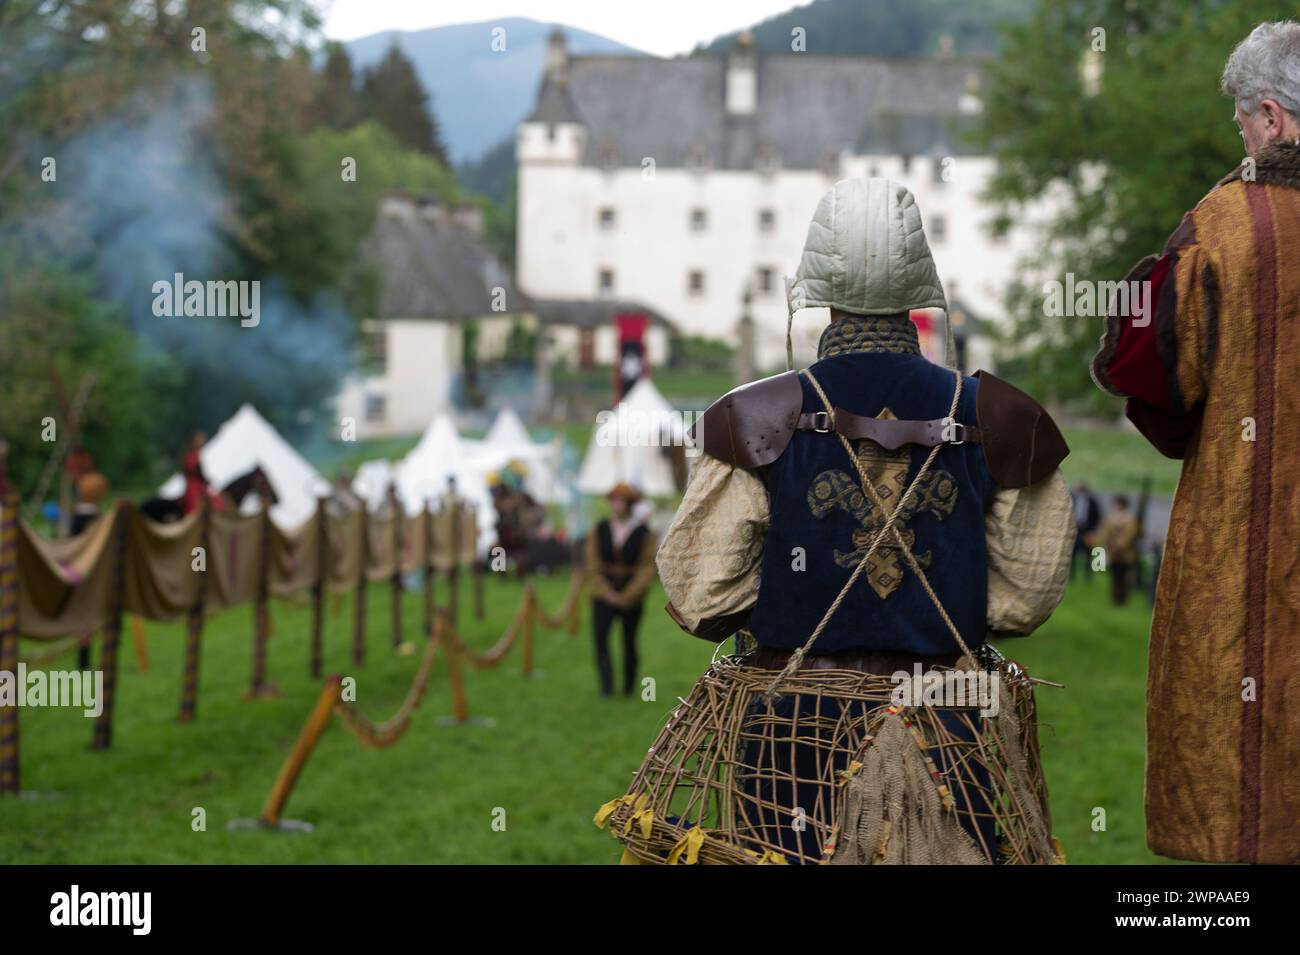 Medieval festivities in Traquair mark the remembrance of battle of Flooden with a joustling tournament and various kind combat and demonstration. |  R Stock Photo